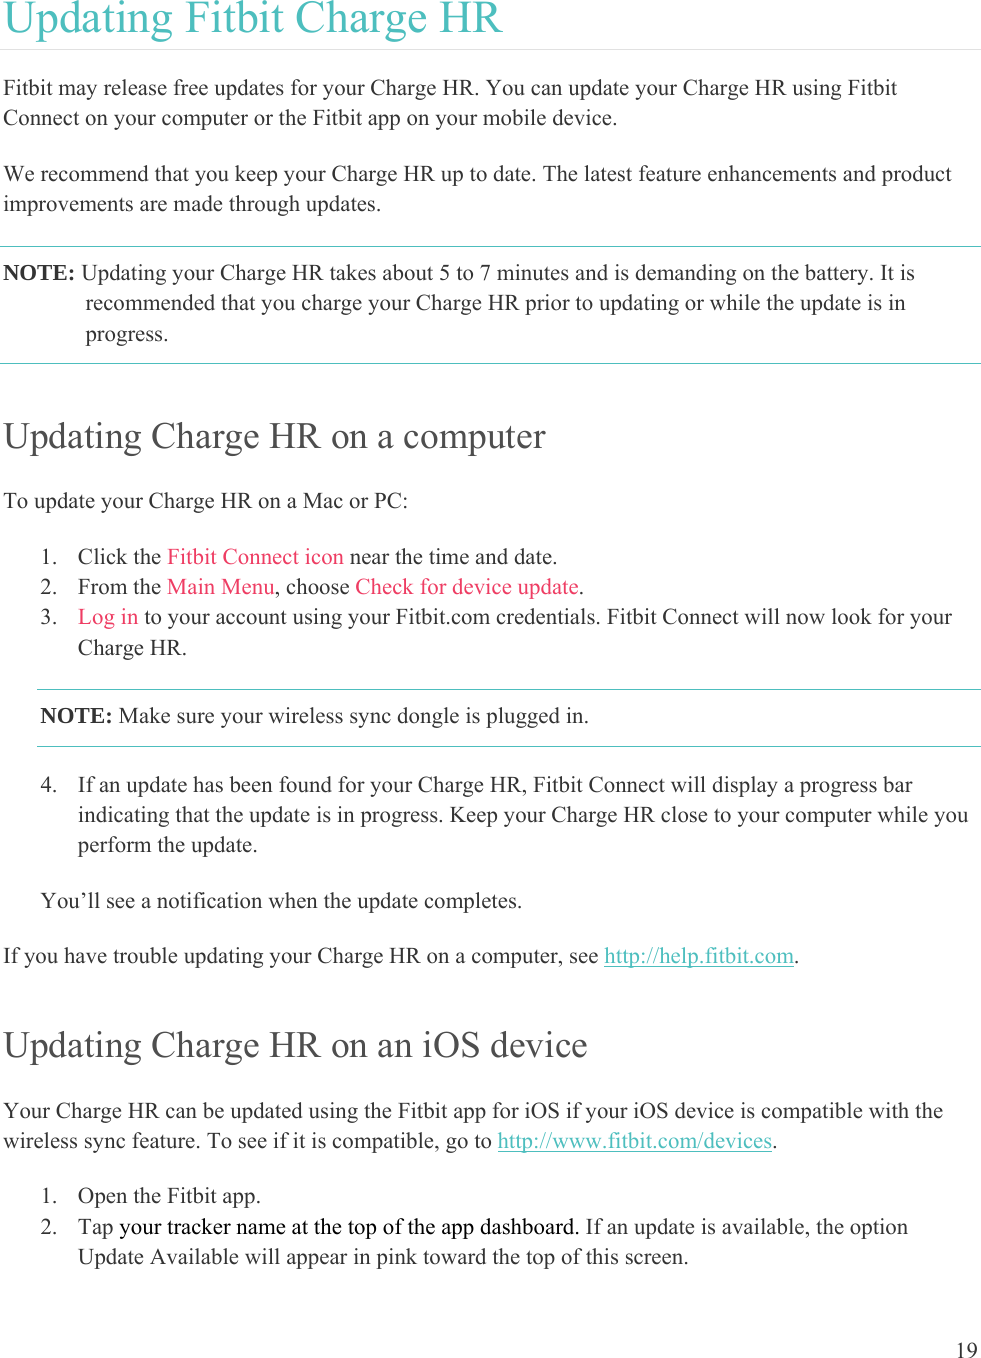 19  Updating Fitbit Charge HR Fitbit may release free updates for your Charge HR. You can update your Charge HR using Fitbit Connect on your computer or the Fitbit app on your mobile device.  We recommend that you keep your Charge HR up to date. The latest feature enhancements and product improvements are made through updates.  NOTE: Updating your Charge HR takes about 5 to 7 minutes and is demanding on the battery. It is recommended that you charge your Charge HR prior to updating or while the update is in progress.   Updating Charge HR on a computer To update your Charge HR on a Mac or PC:  1. Click the Fitbit Connect icon near the time and date.  2. From the Main Menu, choose Check for device update. 3. Log in to your account using your Fitbit.com credentials. Fitbit Connect will now look for your Charge HR. NOTE: Make sure your wireless sync dongle is plugged in.  4. If an update has been found for your Charge HR, Fitbit Connect will display a progress bar indicating that the update is in progress. Keep your Charge HR close to your computer while you perform the update.   You’ll see a notification when the update completes.  If you have trouble updating your Charge HR on a computer, see http://help.fitbit.com. Updating Charge HR on an iOS device Your Charge HR can be updated using the Fitbit app for iOS if your iOS device is compatible with the wireless sync feature. To see if it is compatible, go to http://www.fitbit.com/devices.  1. Open the Fitbit app.  2. Tap your tracker name at the top of the app dashboard. If an update is available, the option Update Available will appear in pink toward the top of this screen. 